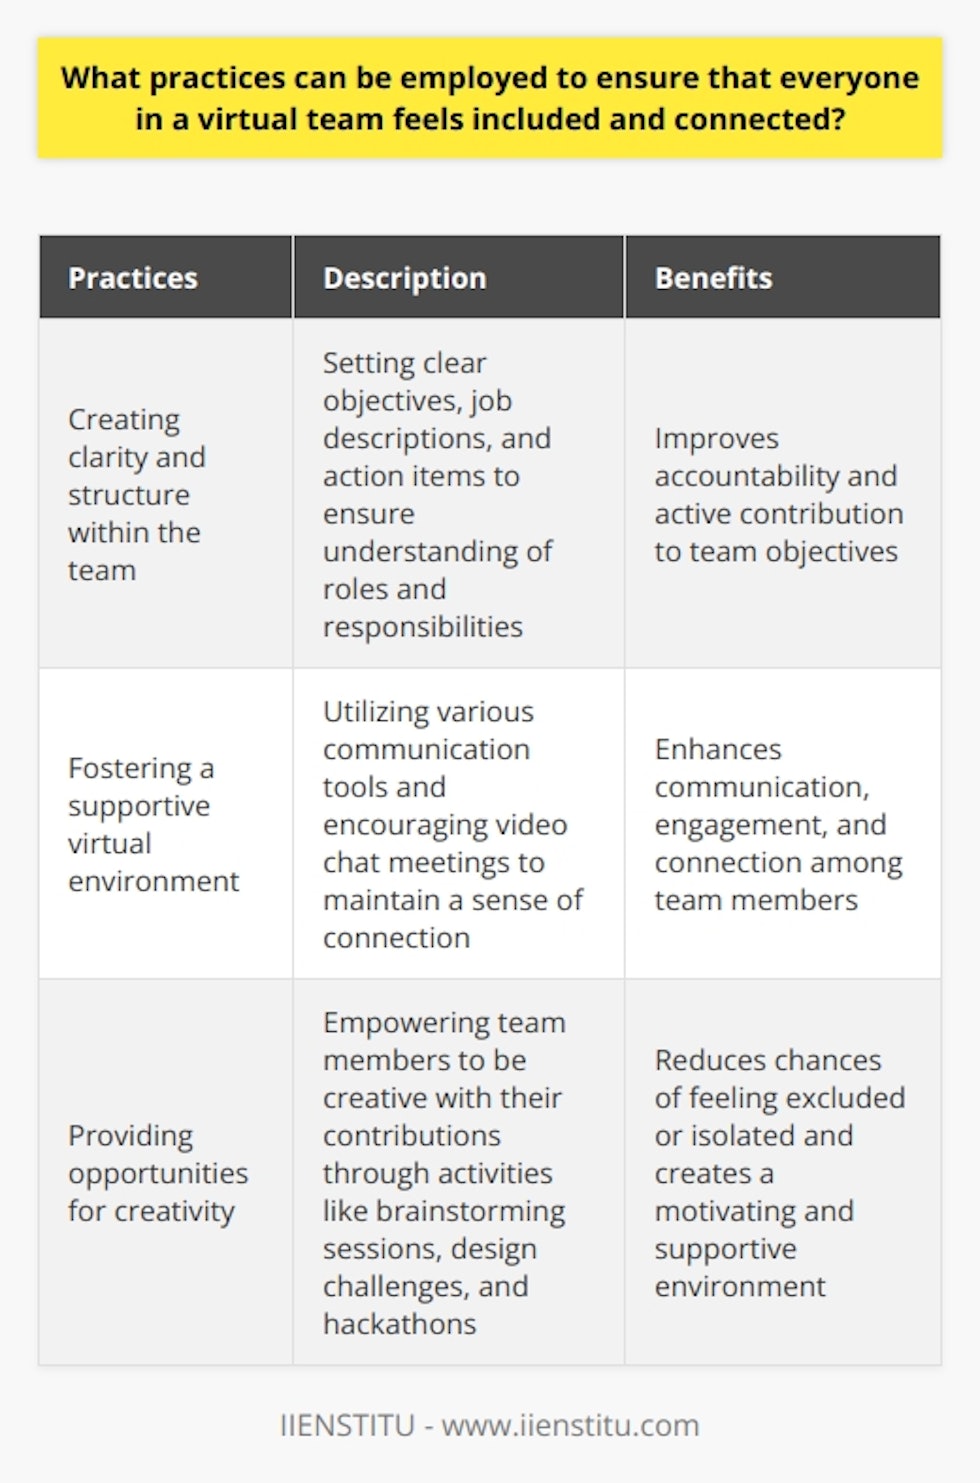 In today's digital workplace, virtual teams are an increasingly popular way of collaborating and increasing productivity. However, these teams can also face challenges when it comes to connection and inclusion. To ensure that everyone in a virtual team feels included and connected, it is important to implement certain practices.Firstly, creating clarity and structure within the team is vital. This can be achieved by setting clear objectives and giving each team member a sense of ownership and accountability. Job descriptions and detailed action items can help in this regard, as they ensure that everyone understands their role and actively contributes to the team's objectives.Secondly, fostering a supportive virtual environment is crucial. Communication is key to maintaining a sense of connection and inclusion. Utilizing various communication tools such as chat, video calls, and discussion boards helps to keep the conversations open and engaged. It is also beneficial to encourage team members to meet face-to-face using video chat whenever possible, as this adds an extra layer of connection.Lastly, providing opportunities for creativity is an effective way of ensuring that every team member feels connected and included. Empowering team members to take the initiative and be creative with their contributions reduces the chances of feeling excluded or isolated. Incorporating activities such as virtual brainstorming sessions, online design challenges, and hackathons can keep the dialogue fresh and open, thus creating a motivating and supportive environment.To sum up, creating a sense of inclusion within a virtual team is crucial for success in a digital environment. By providing clarity, establishing a supportive virtual environment, and encouraging creativity, every team member can have an engaging and meaningful experience. With these practices in place, team members can stay connected, collaborate effectively, and feel supported, leading to increased productivity and success.